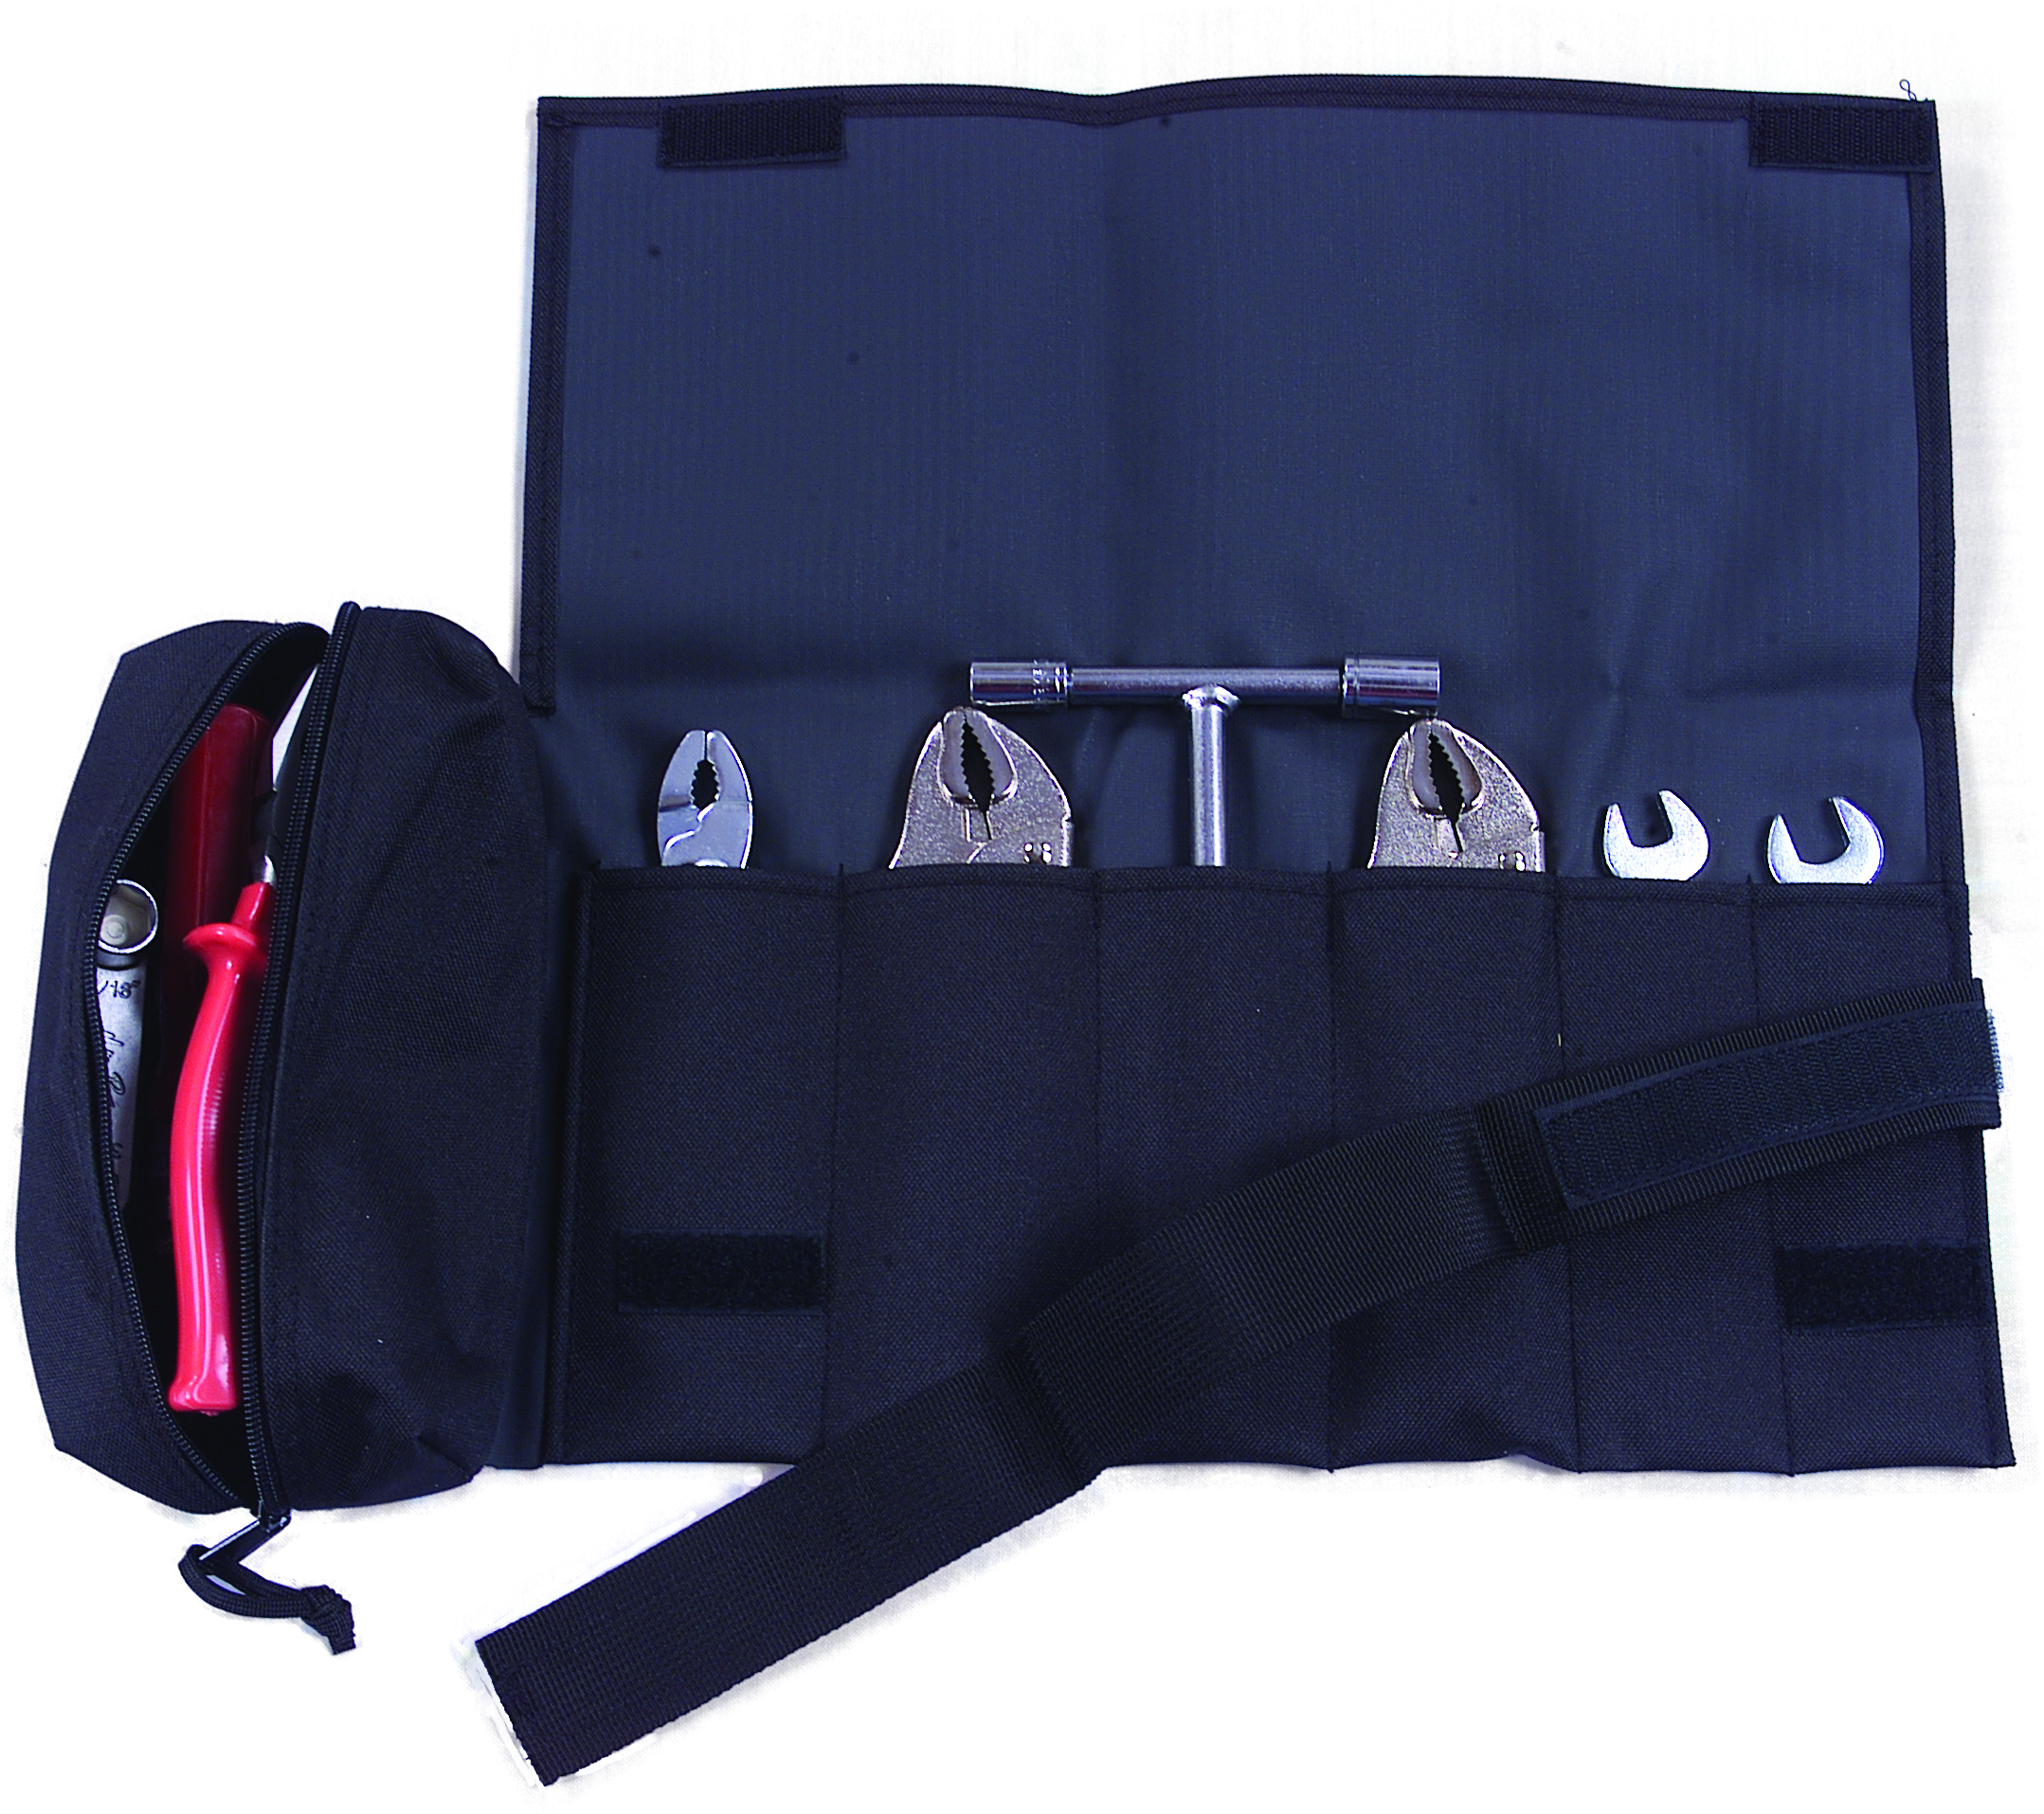 Sp1 - SP1 Deluxe Tool Pouch SM-16083 - SM-16083